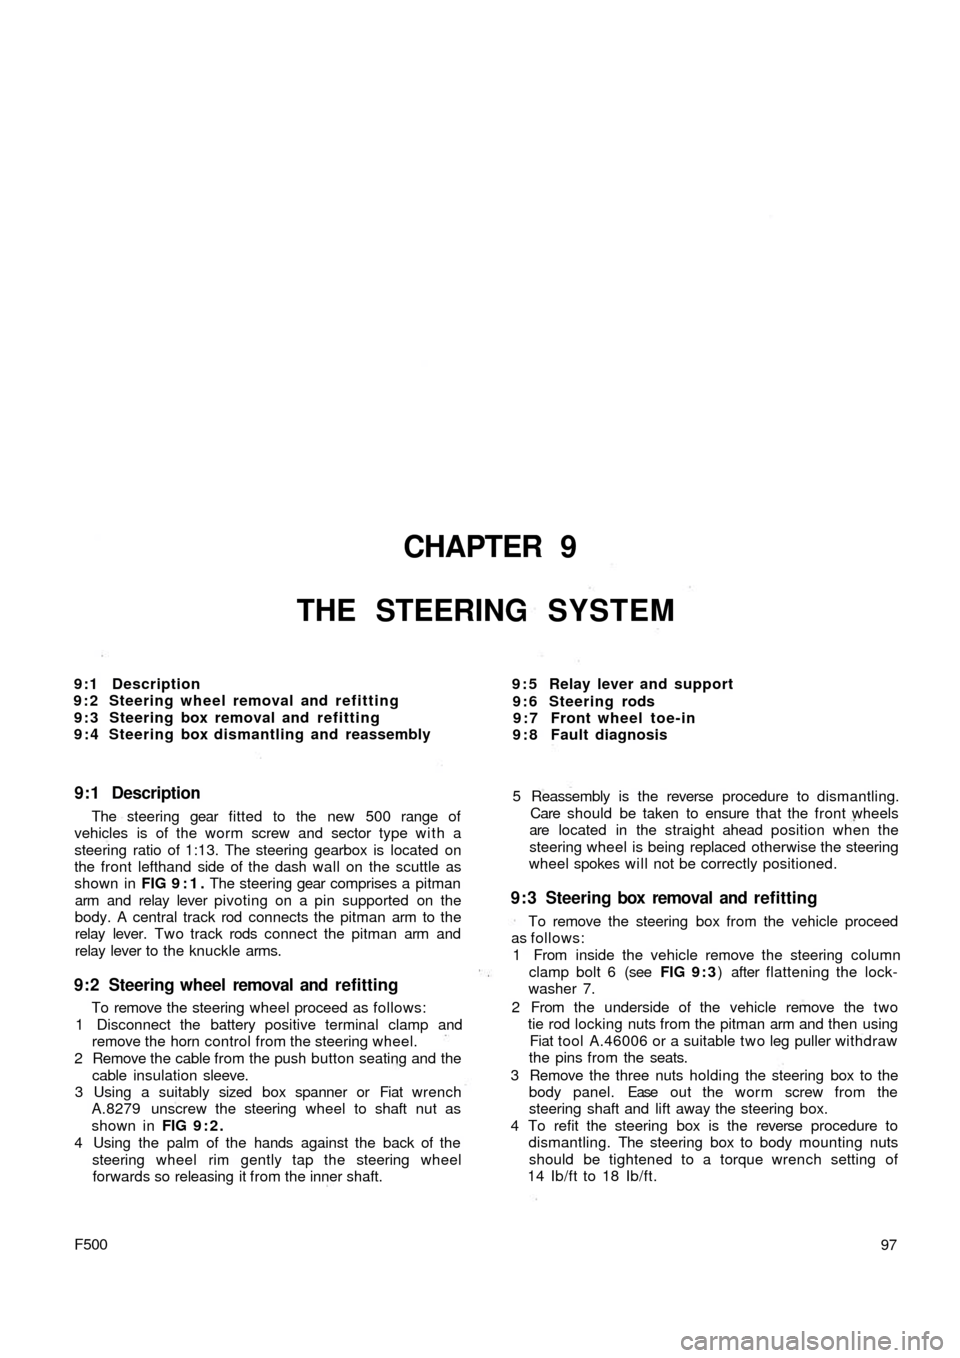 FIAT 500 1971 1.G Workshop Manual CHAPTER 9
THE STEERING SYSTEM
9 : 5 Relay lever and support
9 : 6 Steering rods
9 : 7 Front wheel toe-in
9 : 8 Fault diagnosis 9:1 Description
9 : 2 Steering wheel removal and refitting
9 : 3 Steering